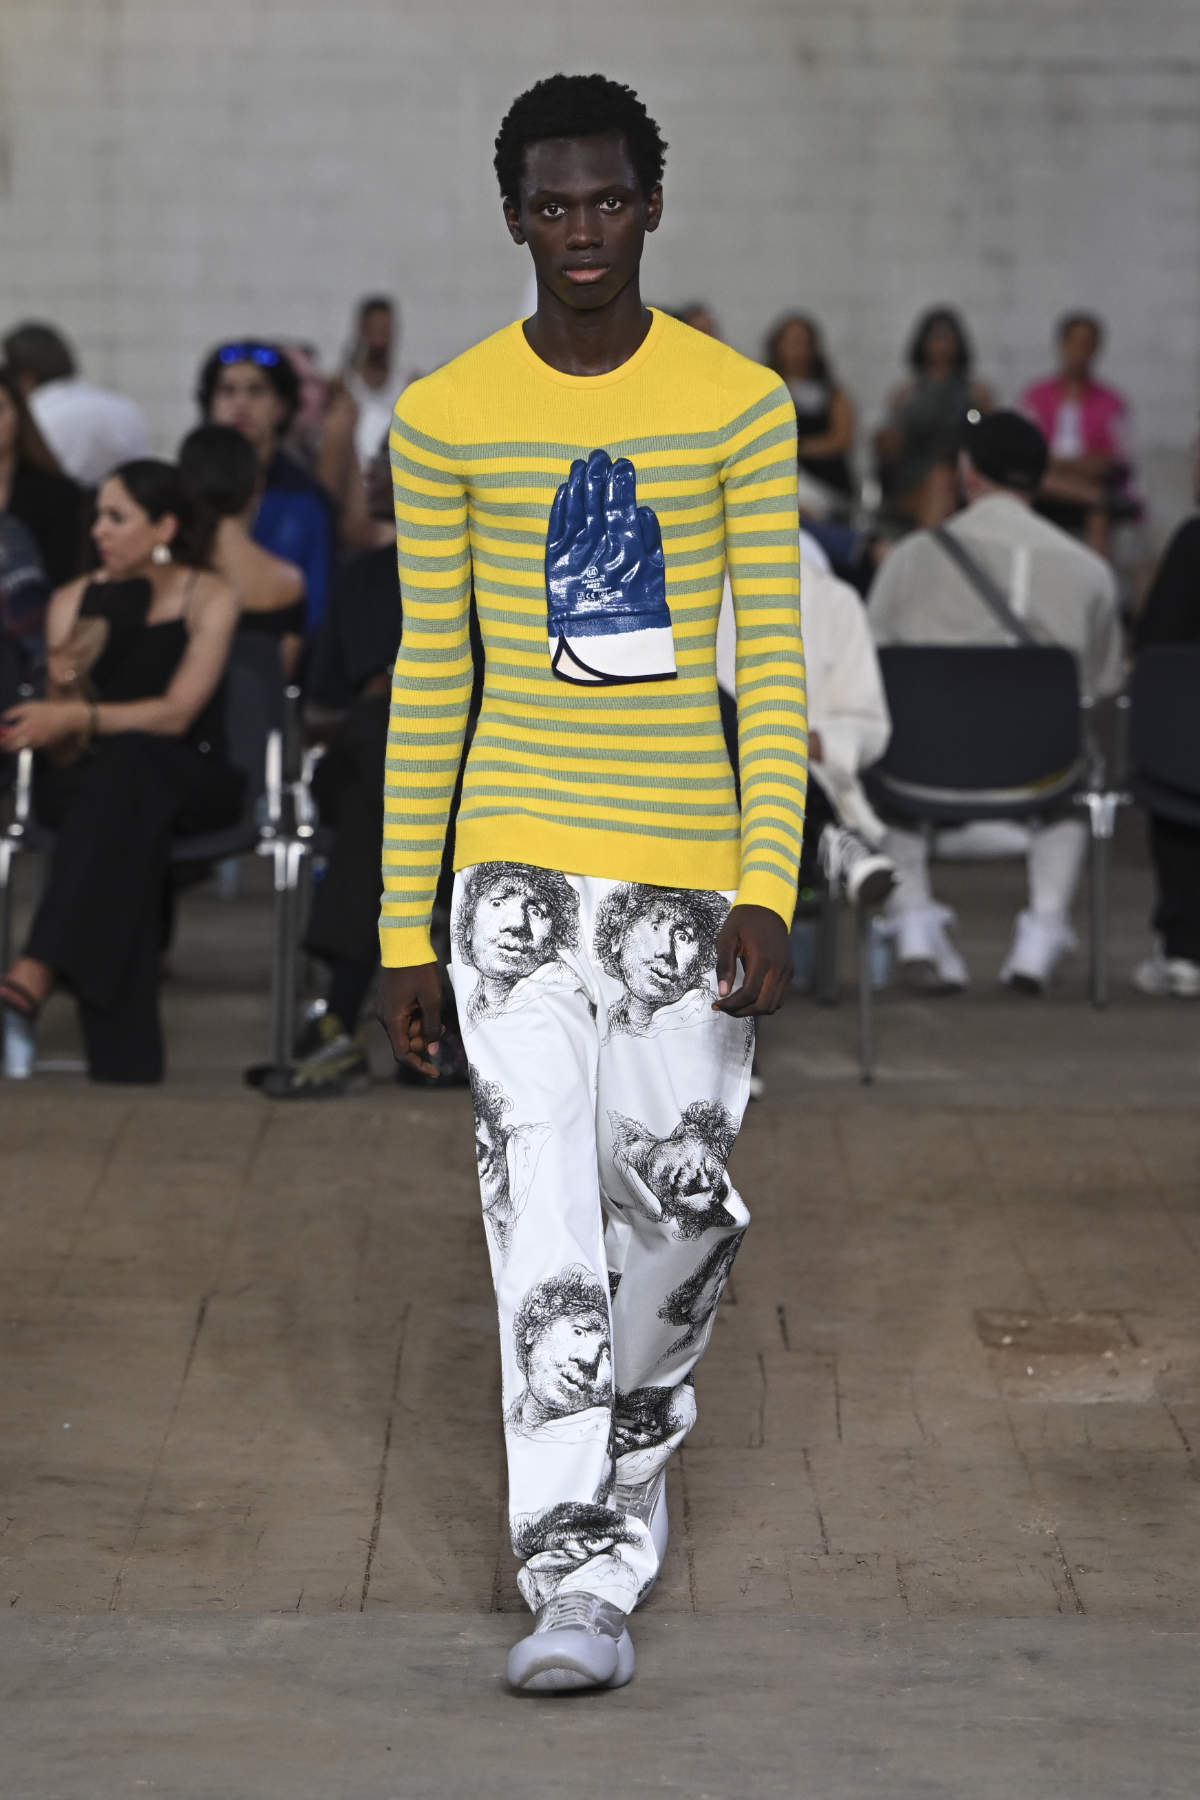 JW Anderson Presents Its New Men’s Spring Summer 2023 And Women’s Resort 23